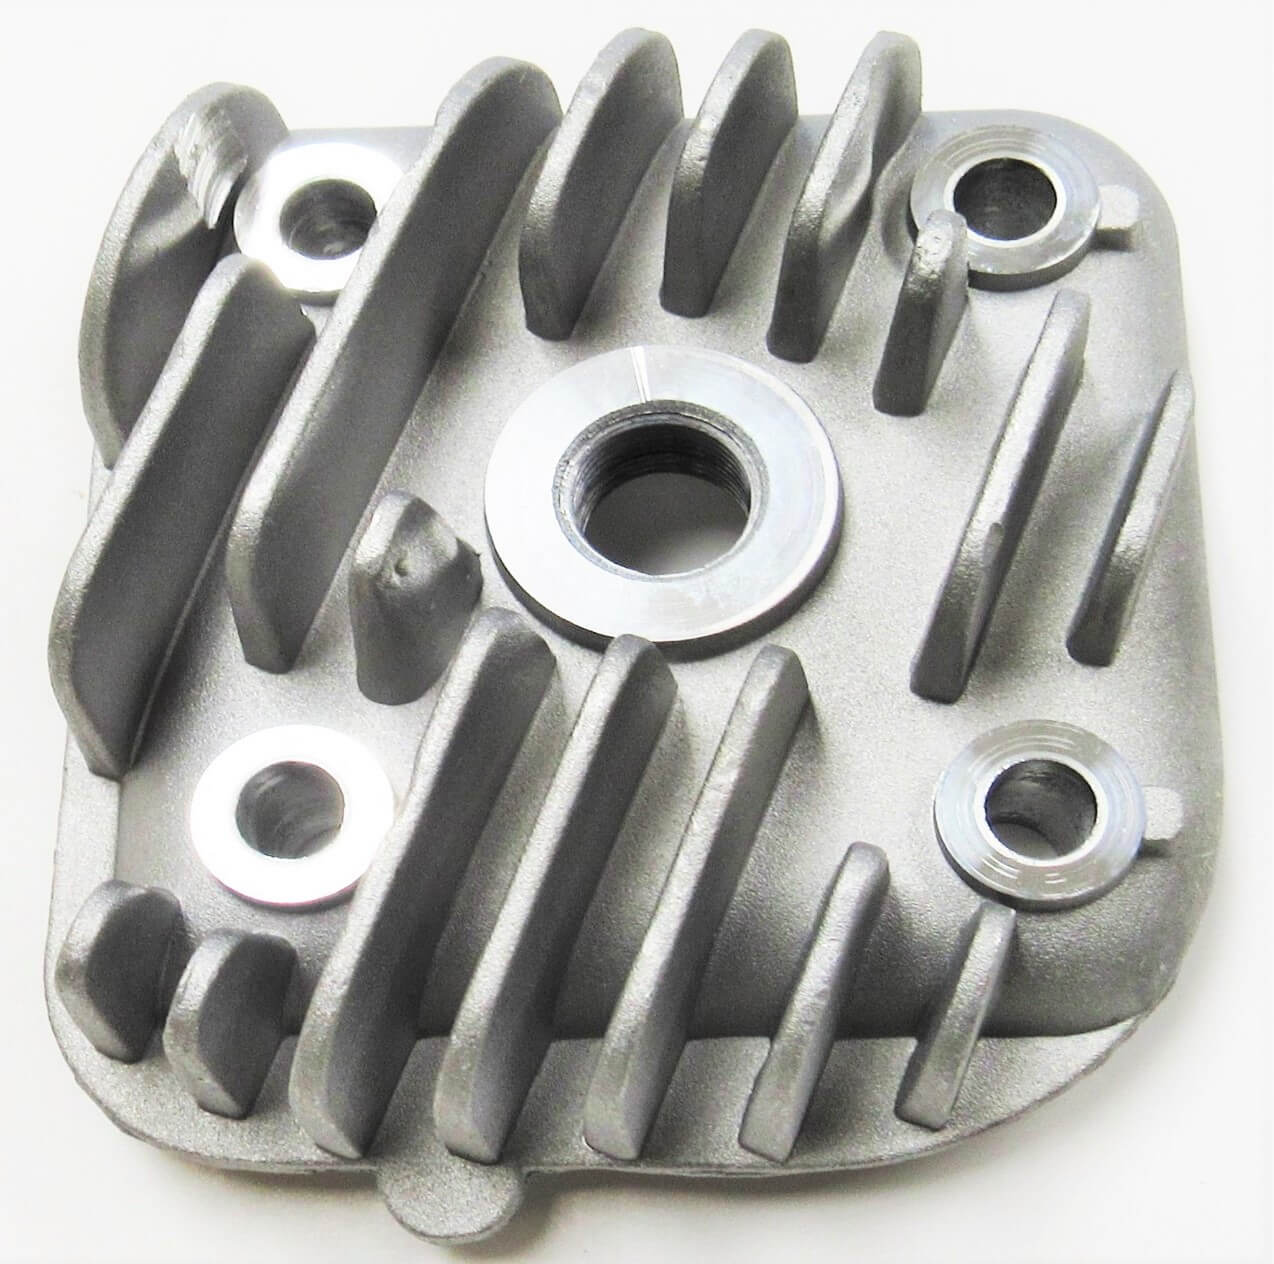 Cylinder Head 47mm E-Ton Viper RXL70cc Fits Most 2 Stroke ATVs and Scooters